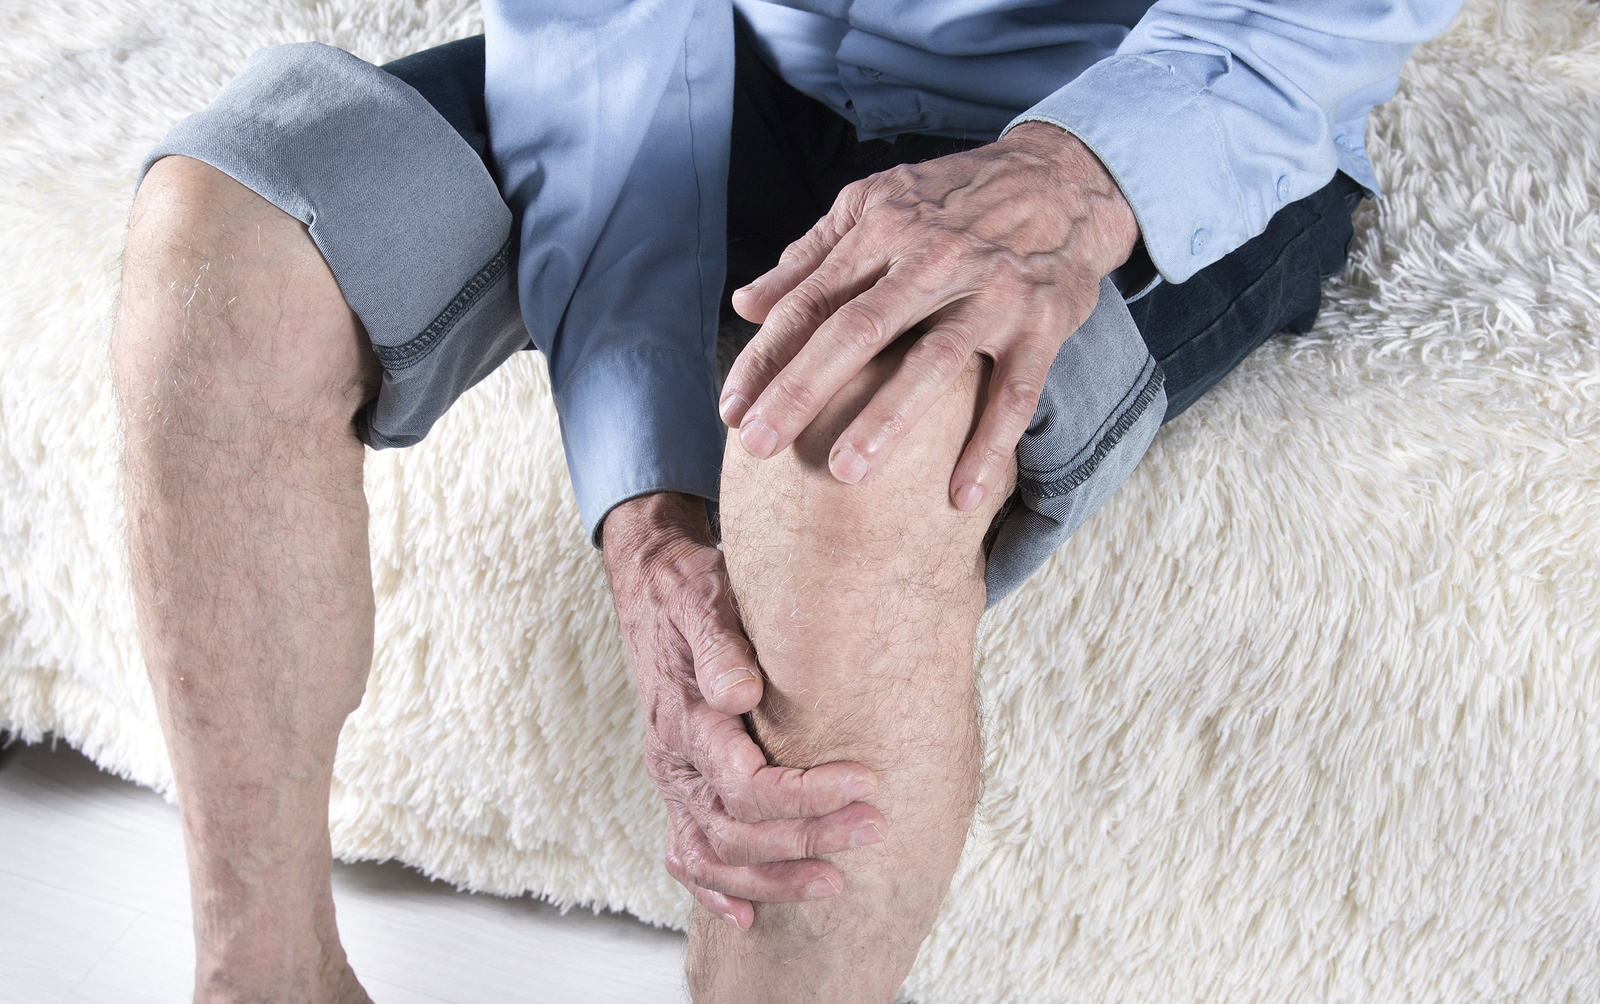 Is it Arthritis or Bursitis that’s Causing Your Joint Pain?